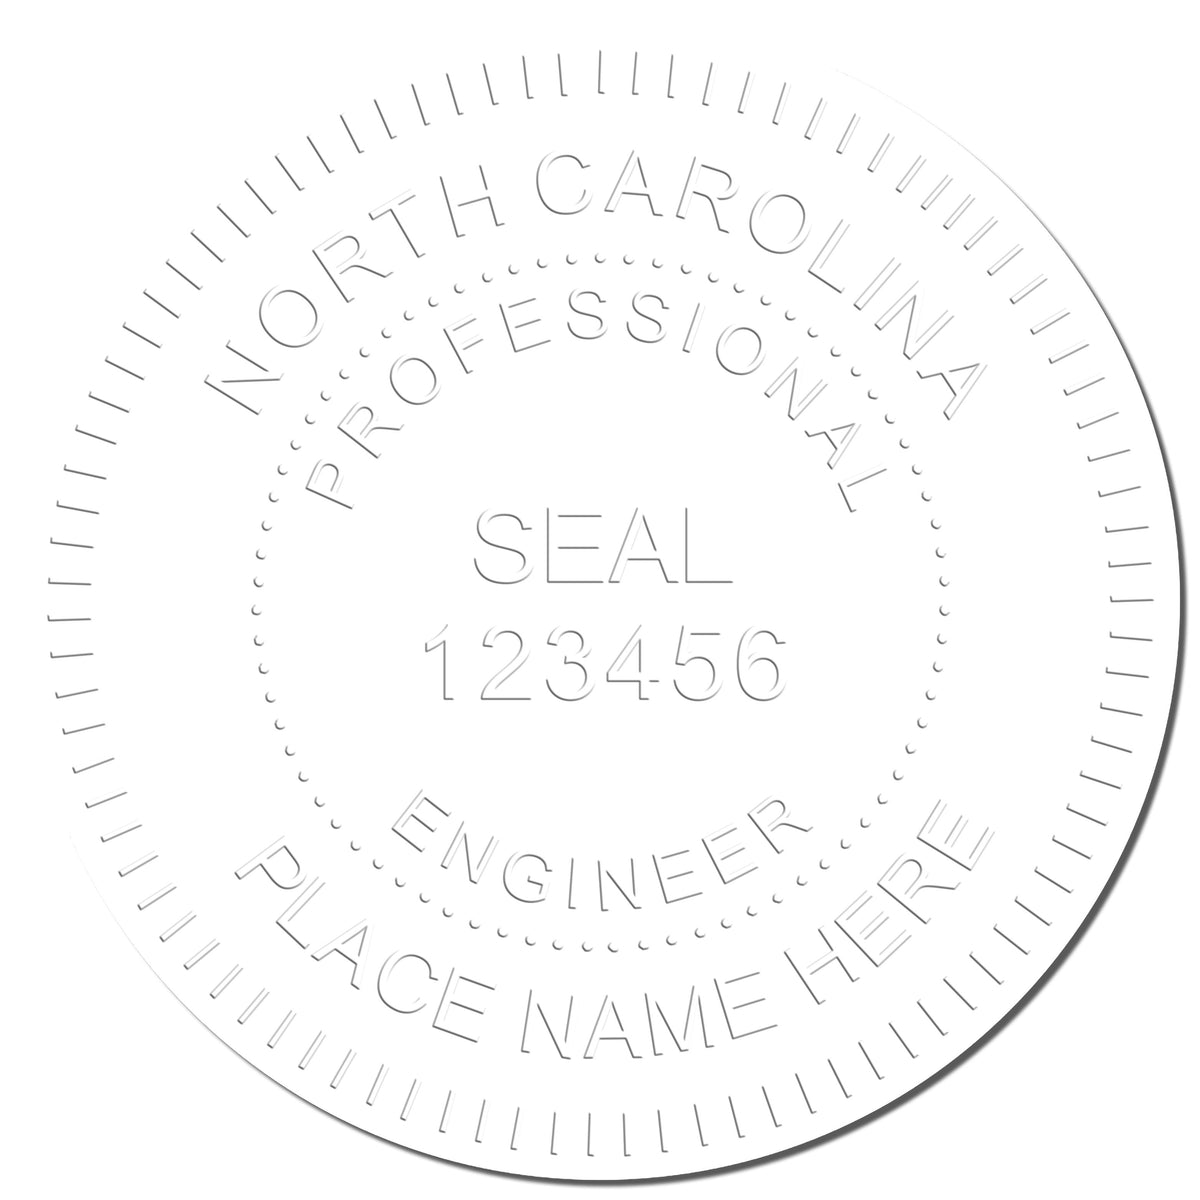 This paper is stamped with a sample imprint of the State of North Carolina Extended Long Reach Engineer Seal, signifying its quality and reliability.